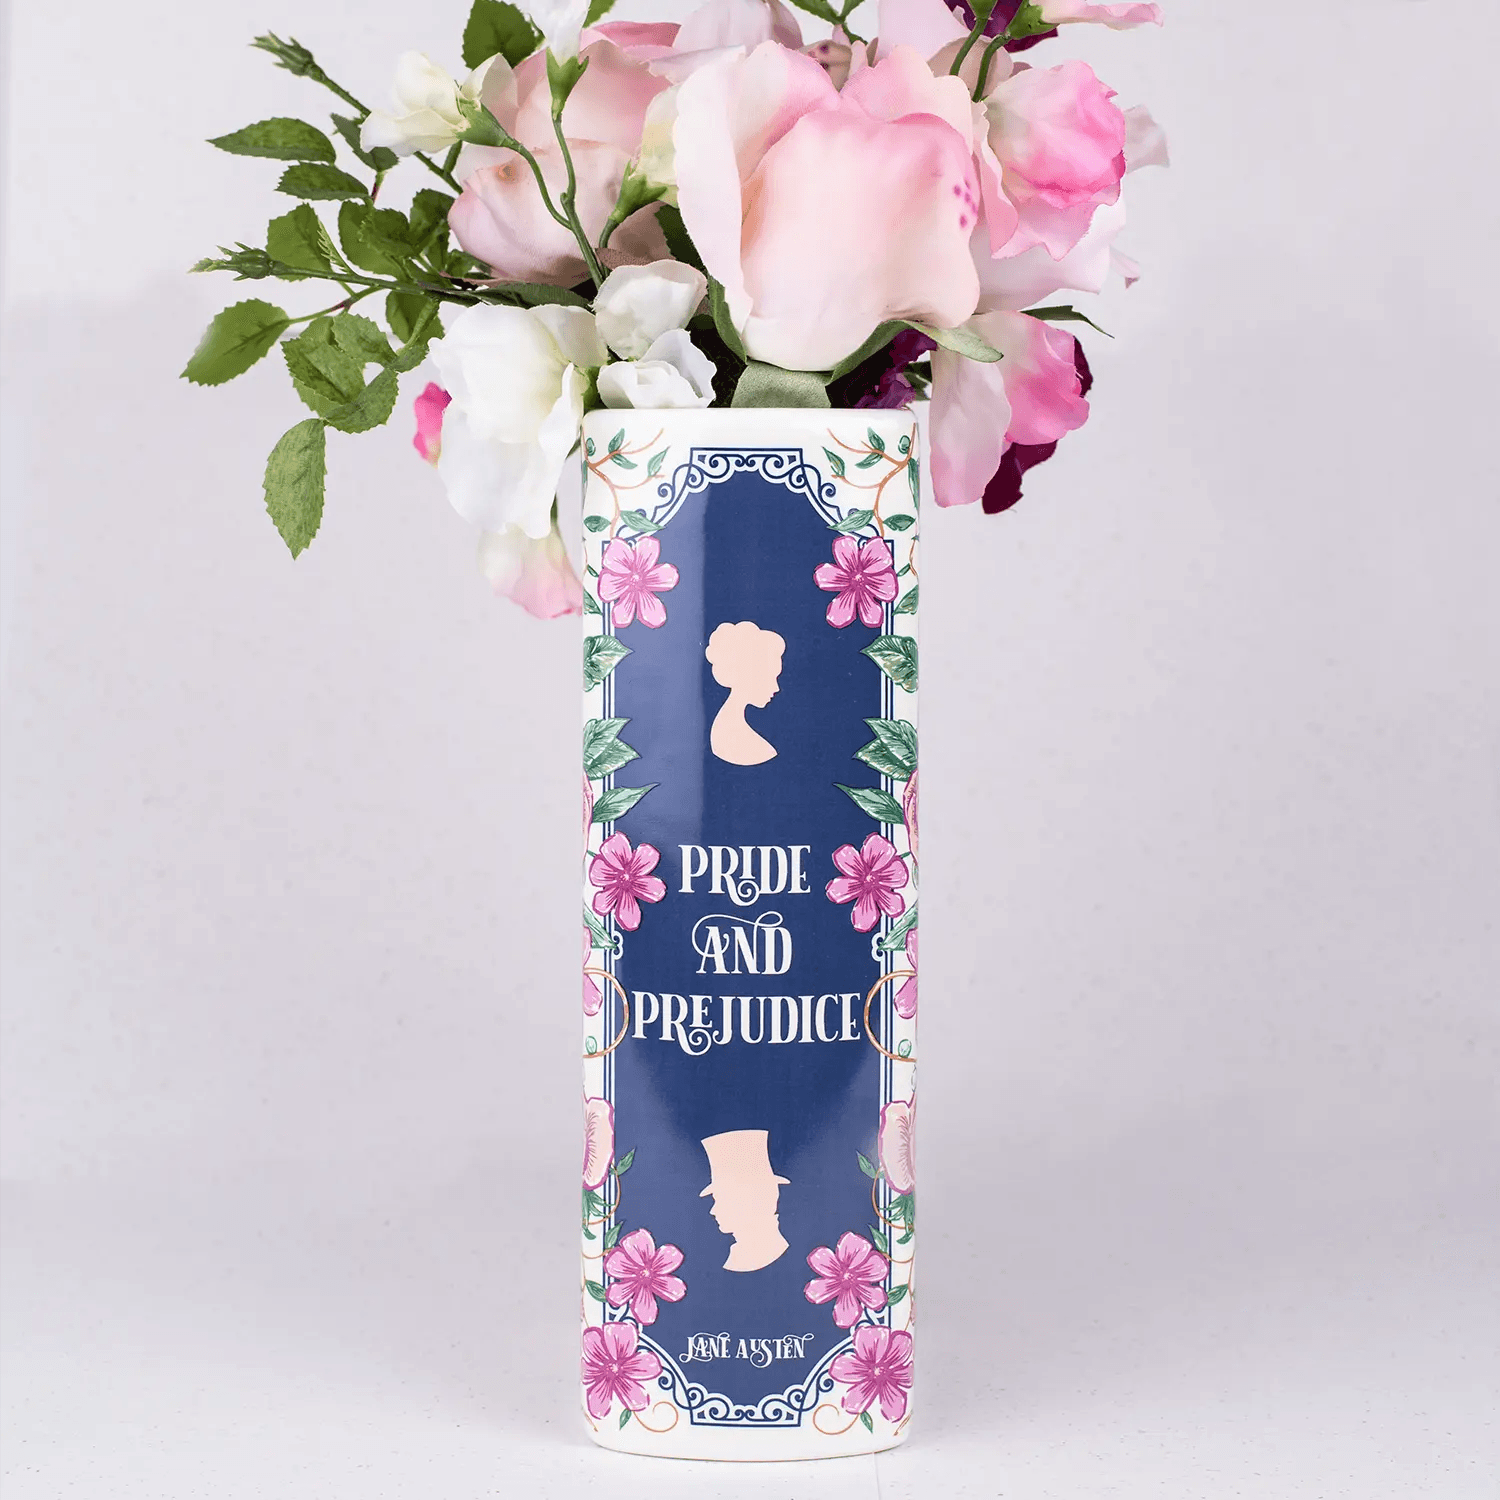 It is a truth universally acknowledged that this gorgeous ceramic book vase is the blossoming addition to your home, that all Jane Austen fans are looking for.